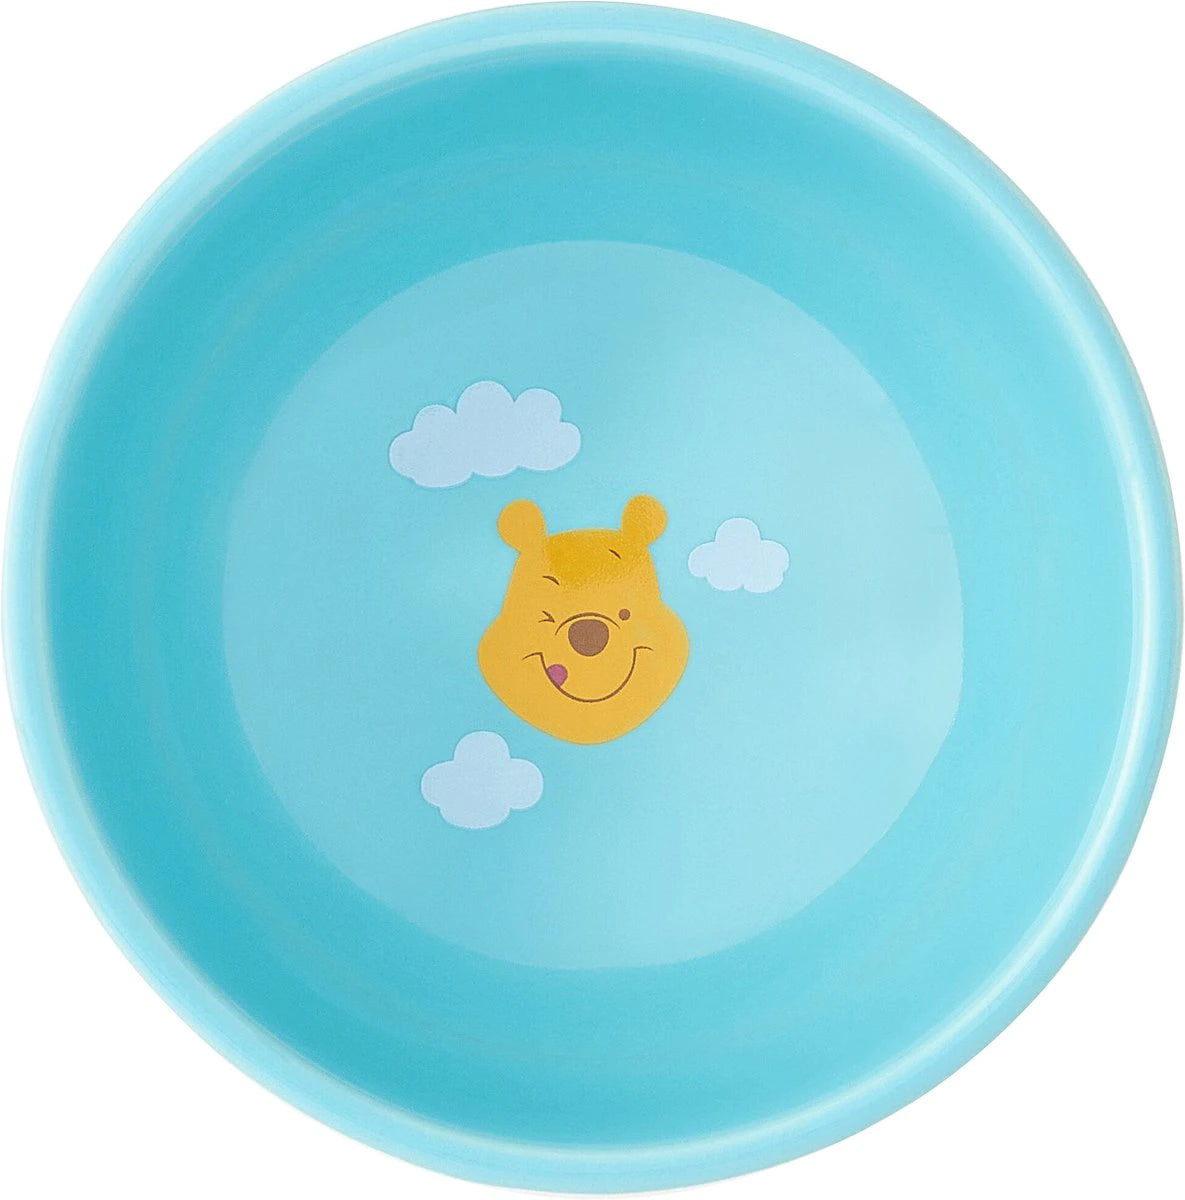 Disney Winnie the Pooh Tall Shape Non-Skid Elevated Ceramic Cat Bowl, 1.5 Cup